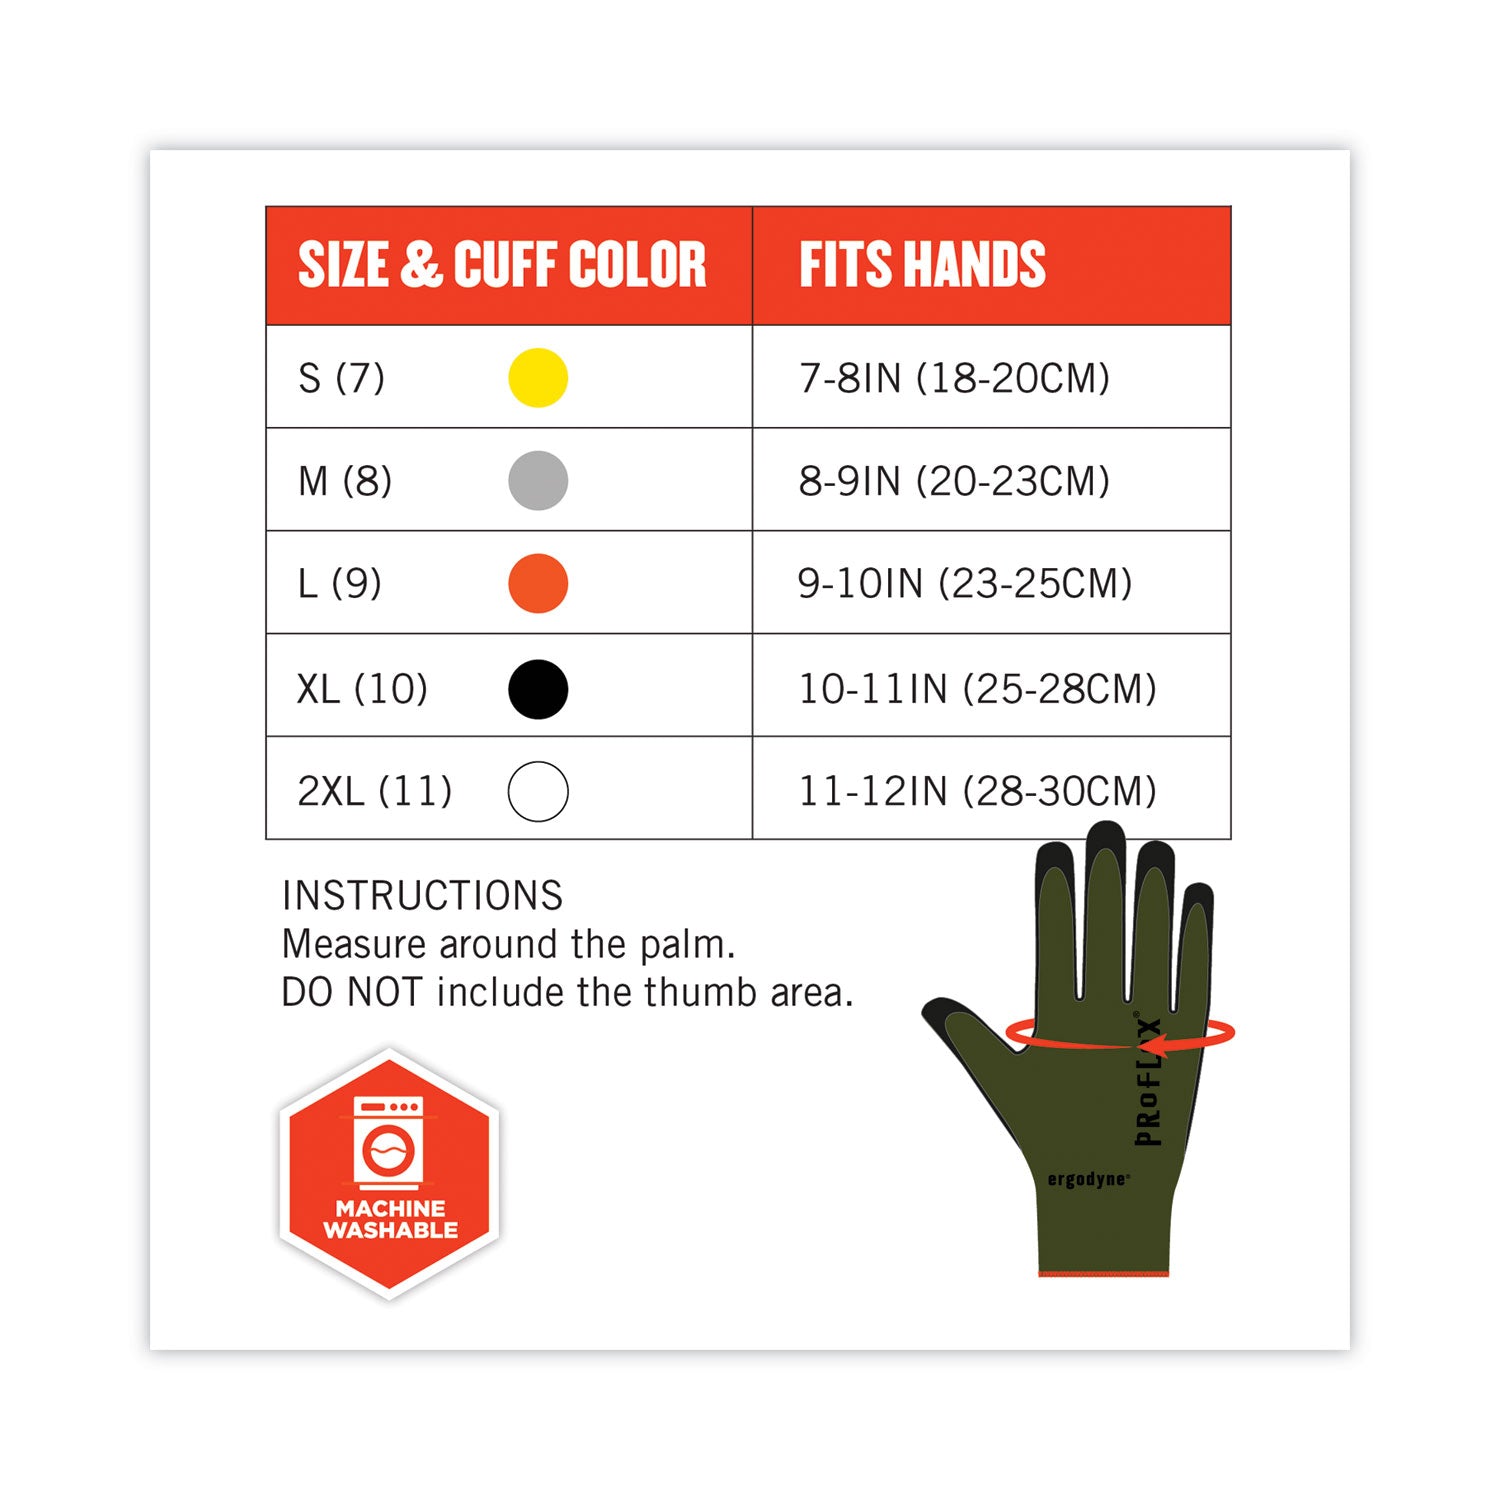 proflex-7042-ansi-a4-nitrile-coated-cr-gloves-green-2x-large-pair-ships-in-1-3-business-days_ego10346 - 2